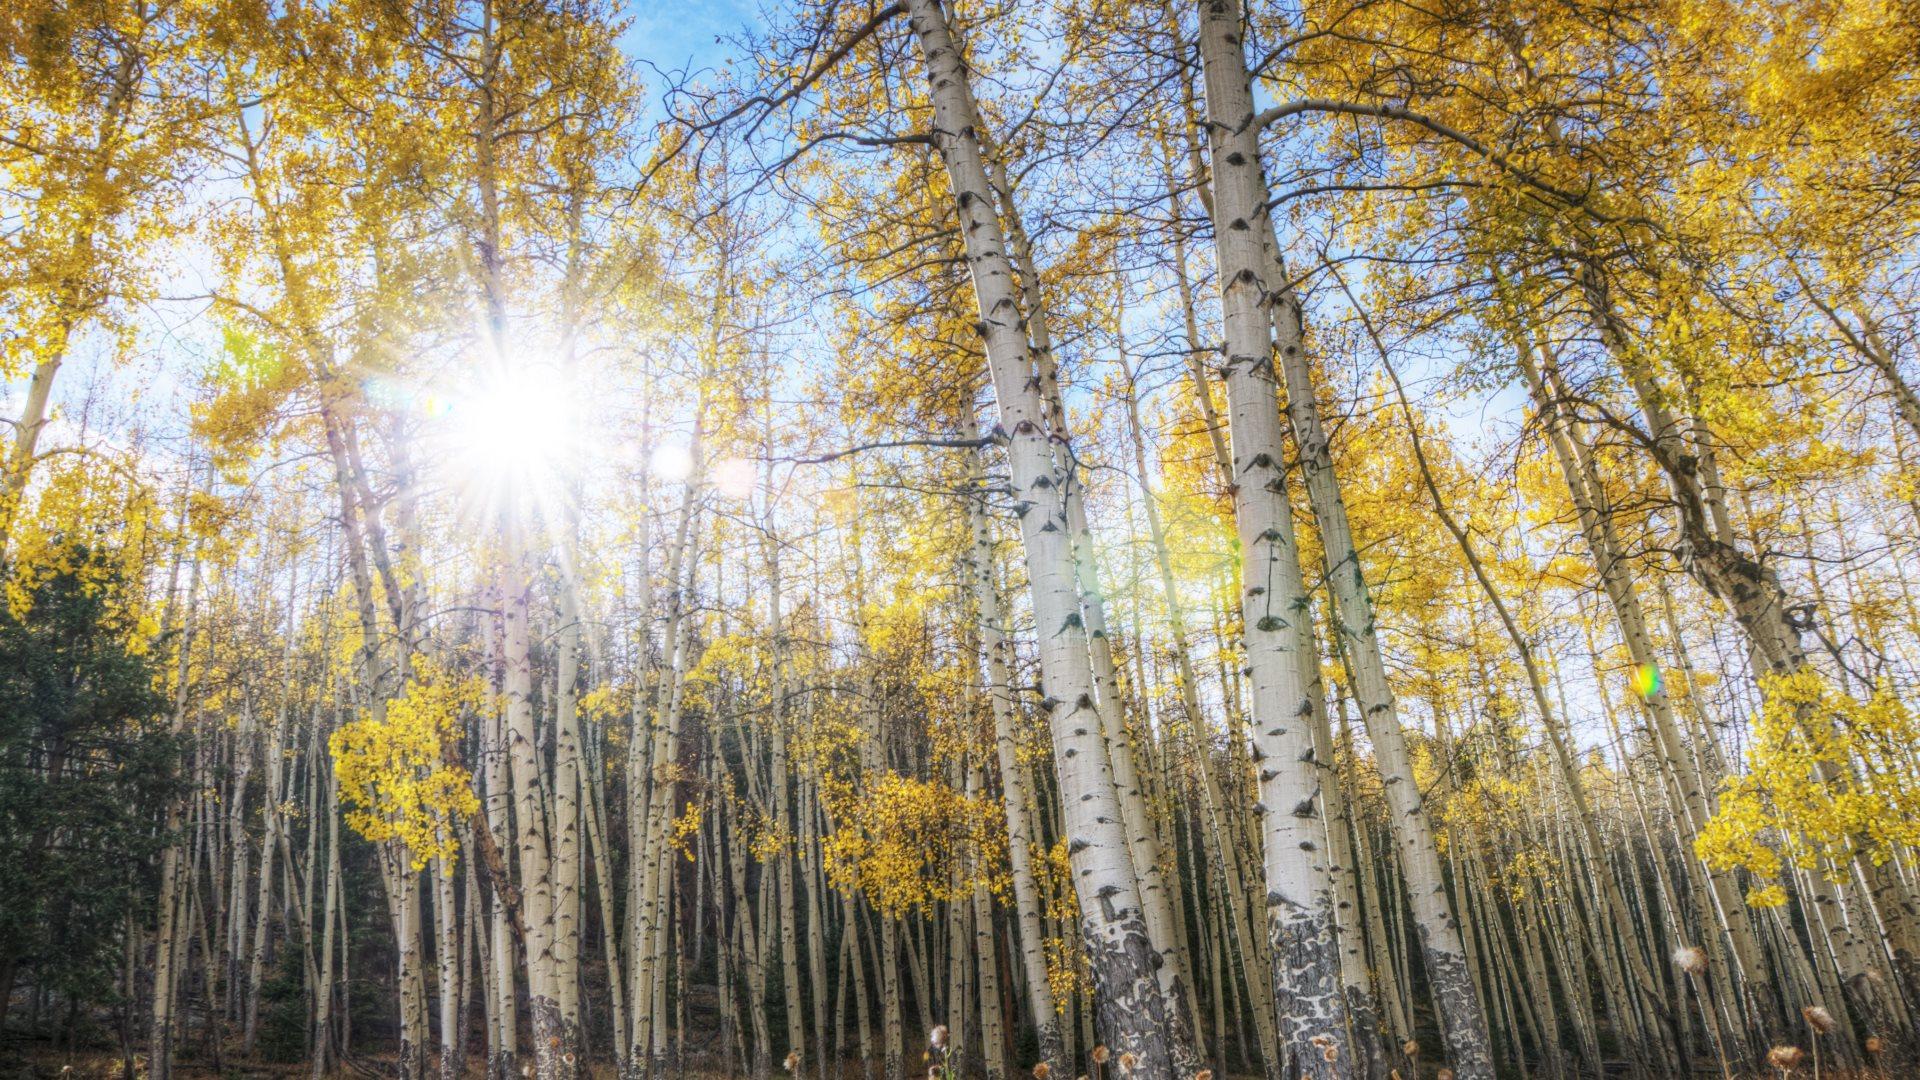 HD wallpaper Aspen Tree Autumn In The Salt Lake City Area The Main Capitol  Of The Utah Bark Of Aspens Landscape Photography Hd Wallpaper For Android  Mobile Phones 38402400  Wallpaper Flare